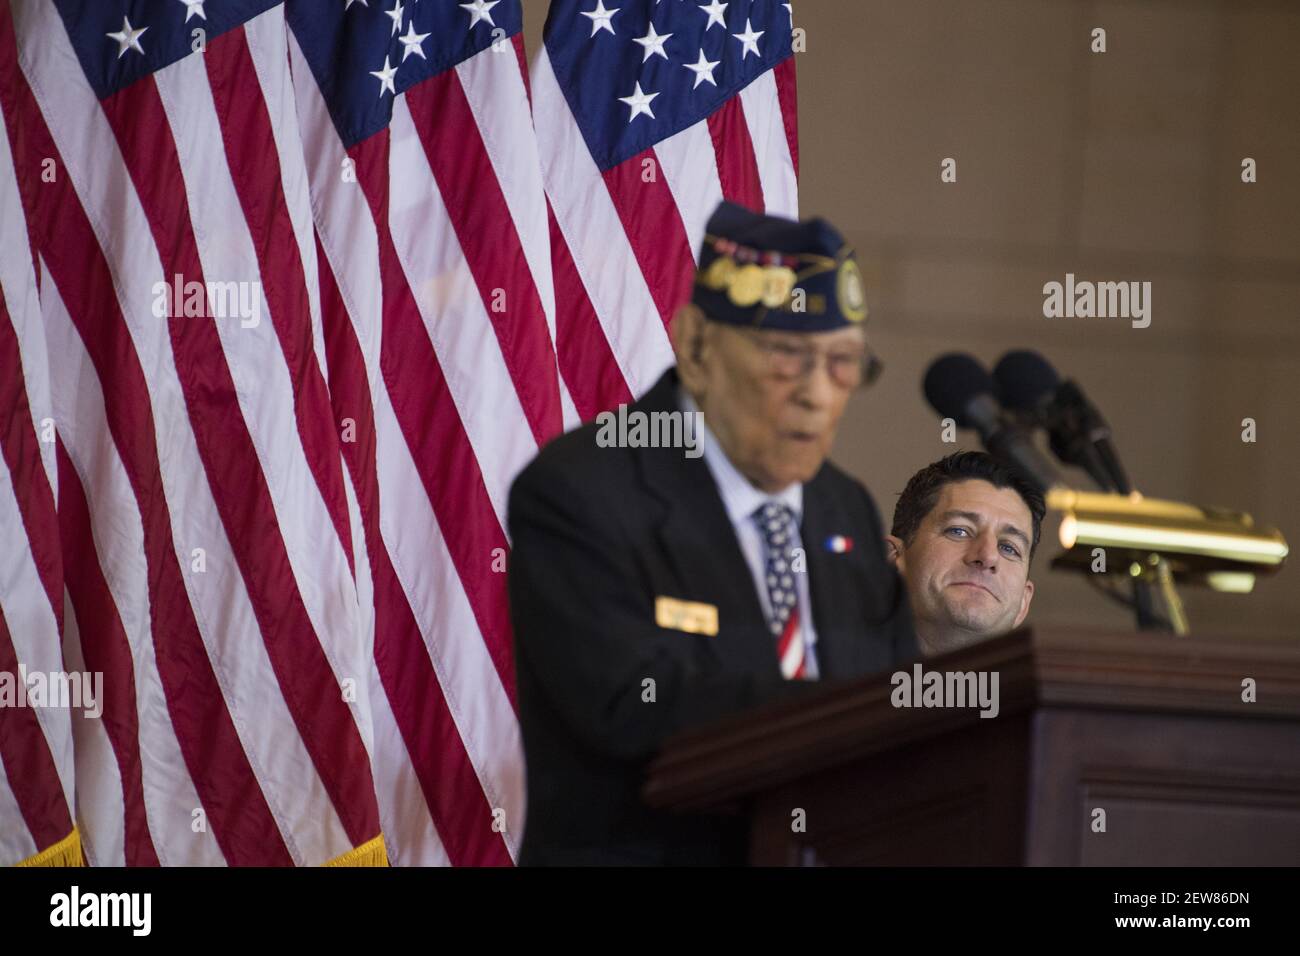 UNITED STATES - OCTOBER 25: Celestino Almeda, a veteran representing the Philippine Commonwealth Army, speaks during a Congressional Gold Medal ceremony in Emancipation Hall to honor Filipino veterans of World War II as Speaker Paul Ryan, R-Wis., looks on, on October 25, 2017. (Photo By Tom Williams/CQ Roll Call) Stock Photo